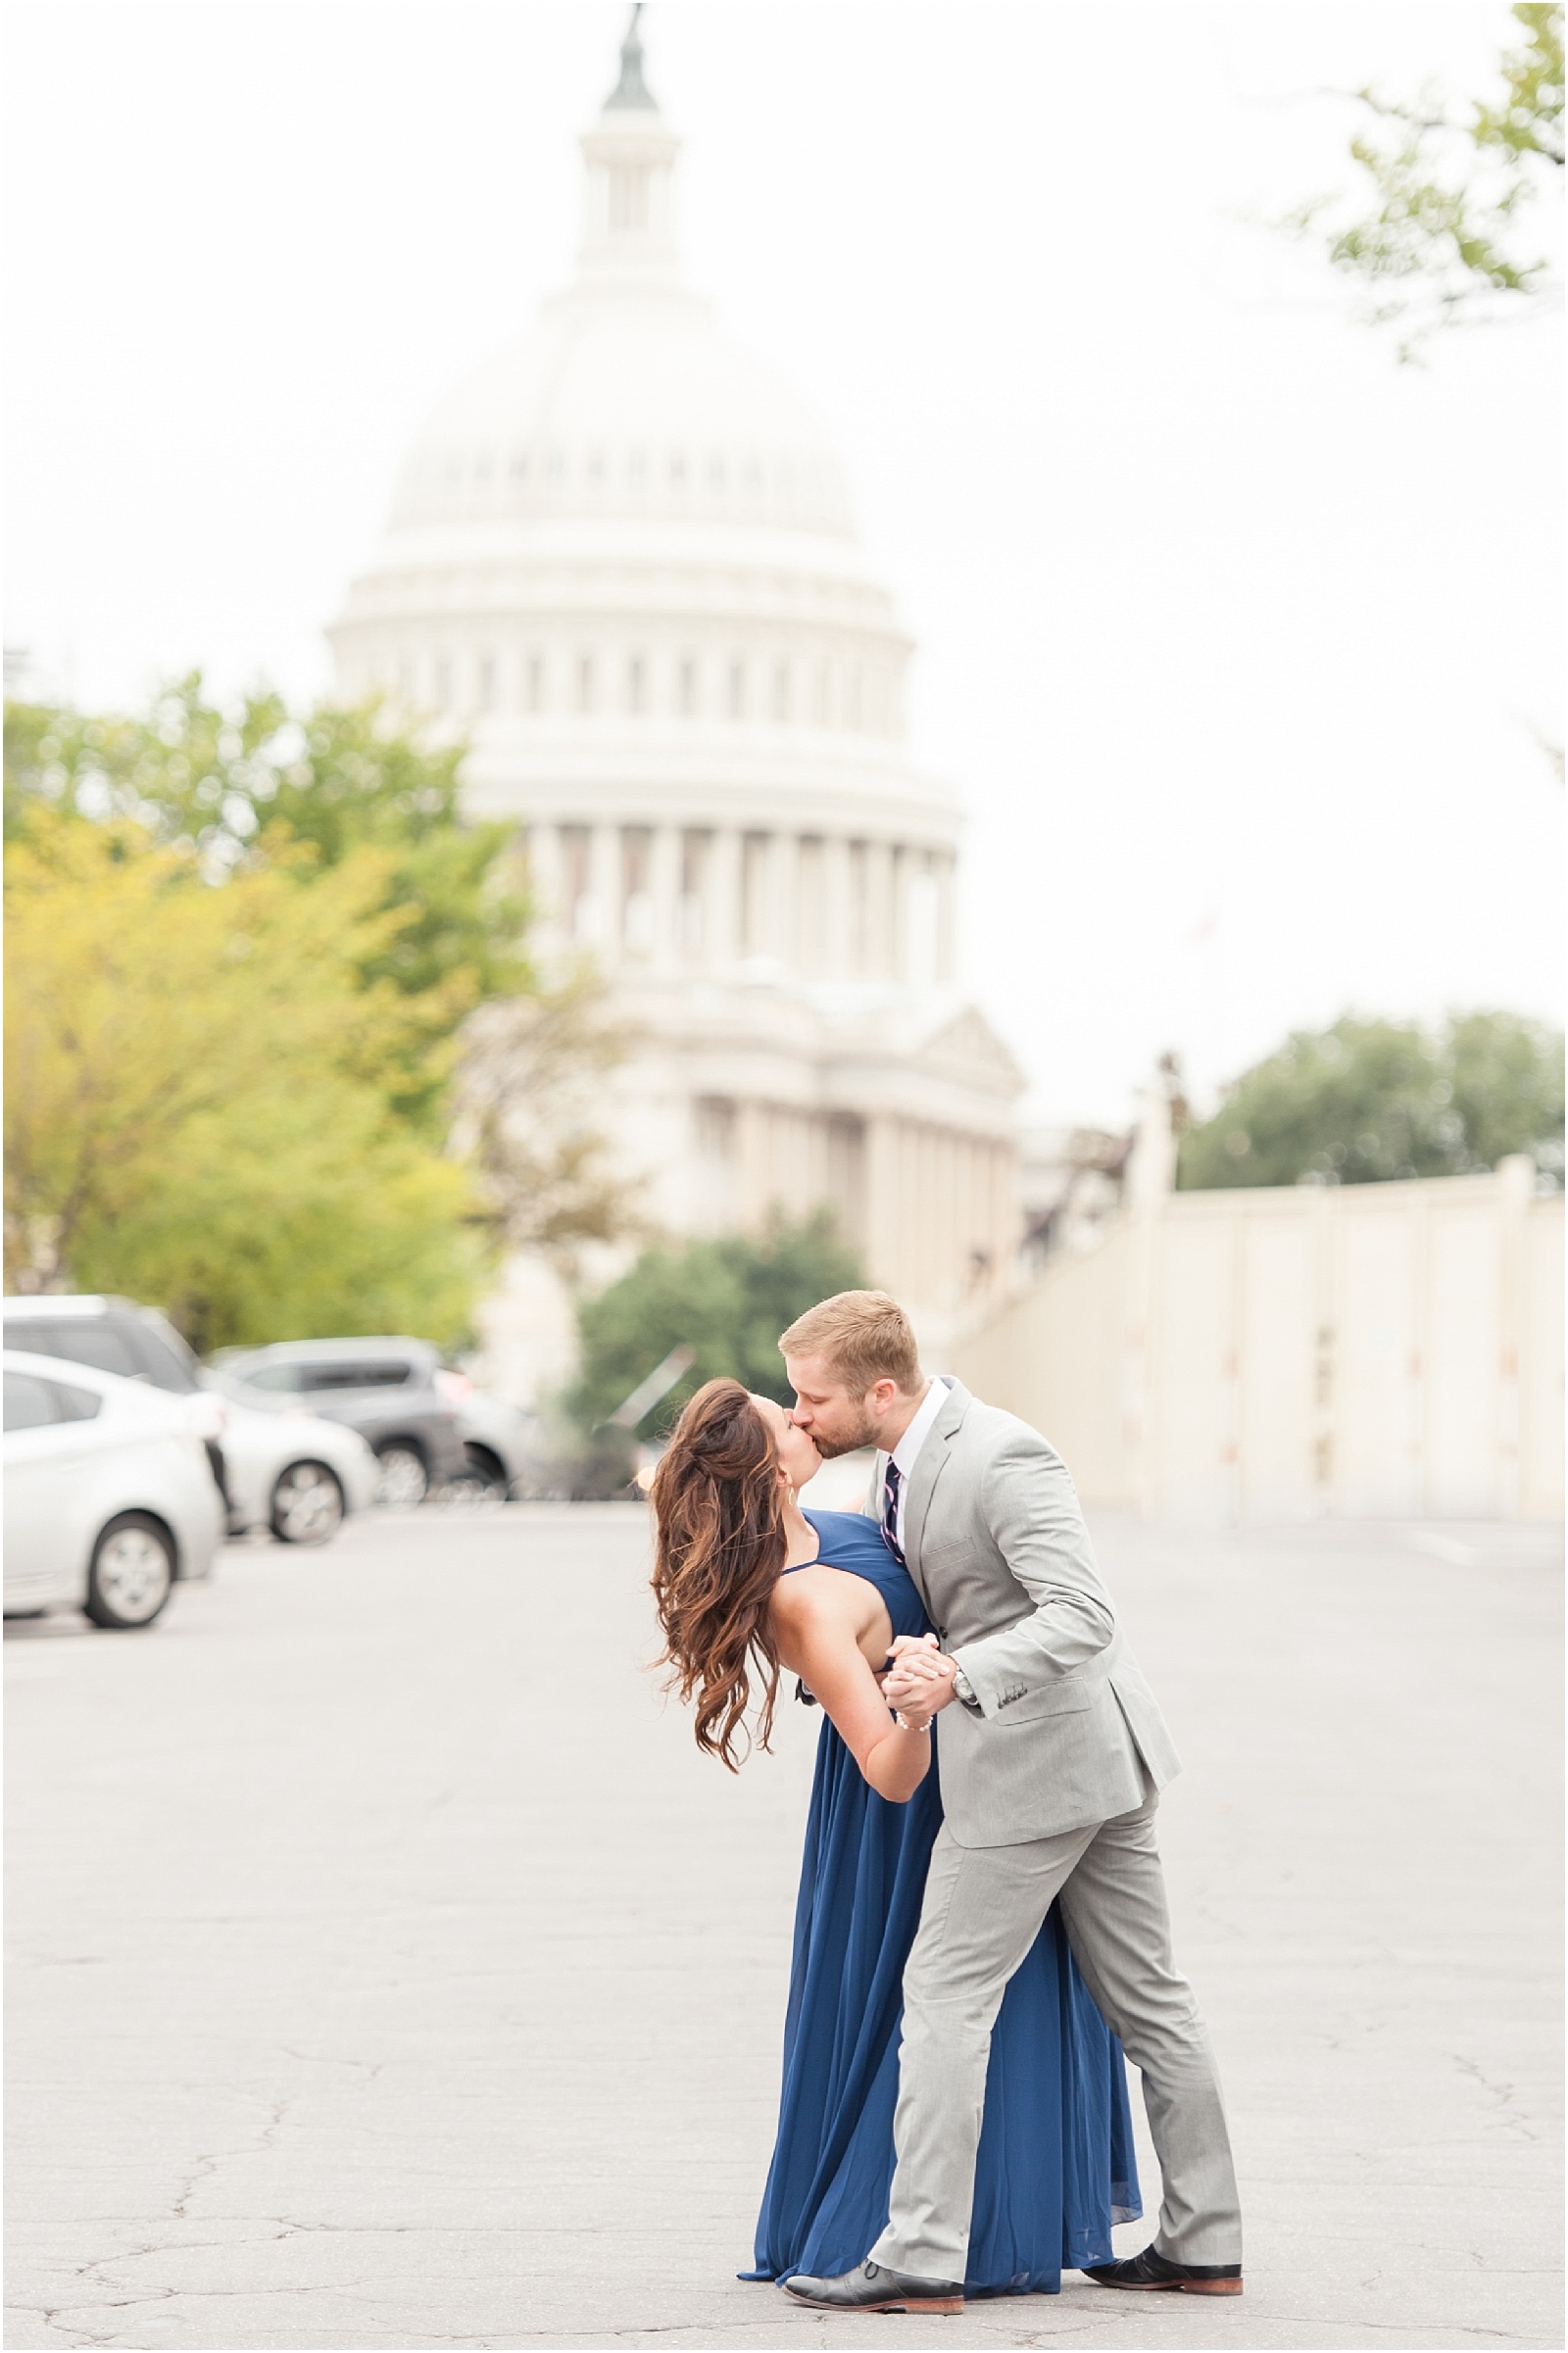 0030 Bret and Brandie Photography| Washington DC Engagement | Megan and Connor.jpg